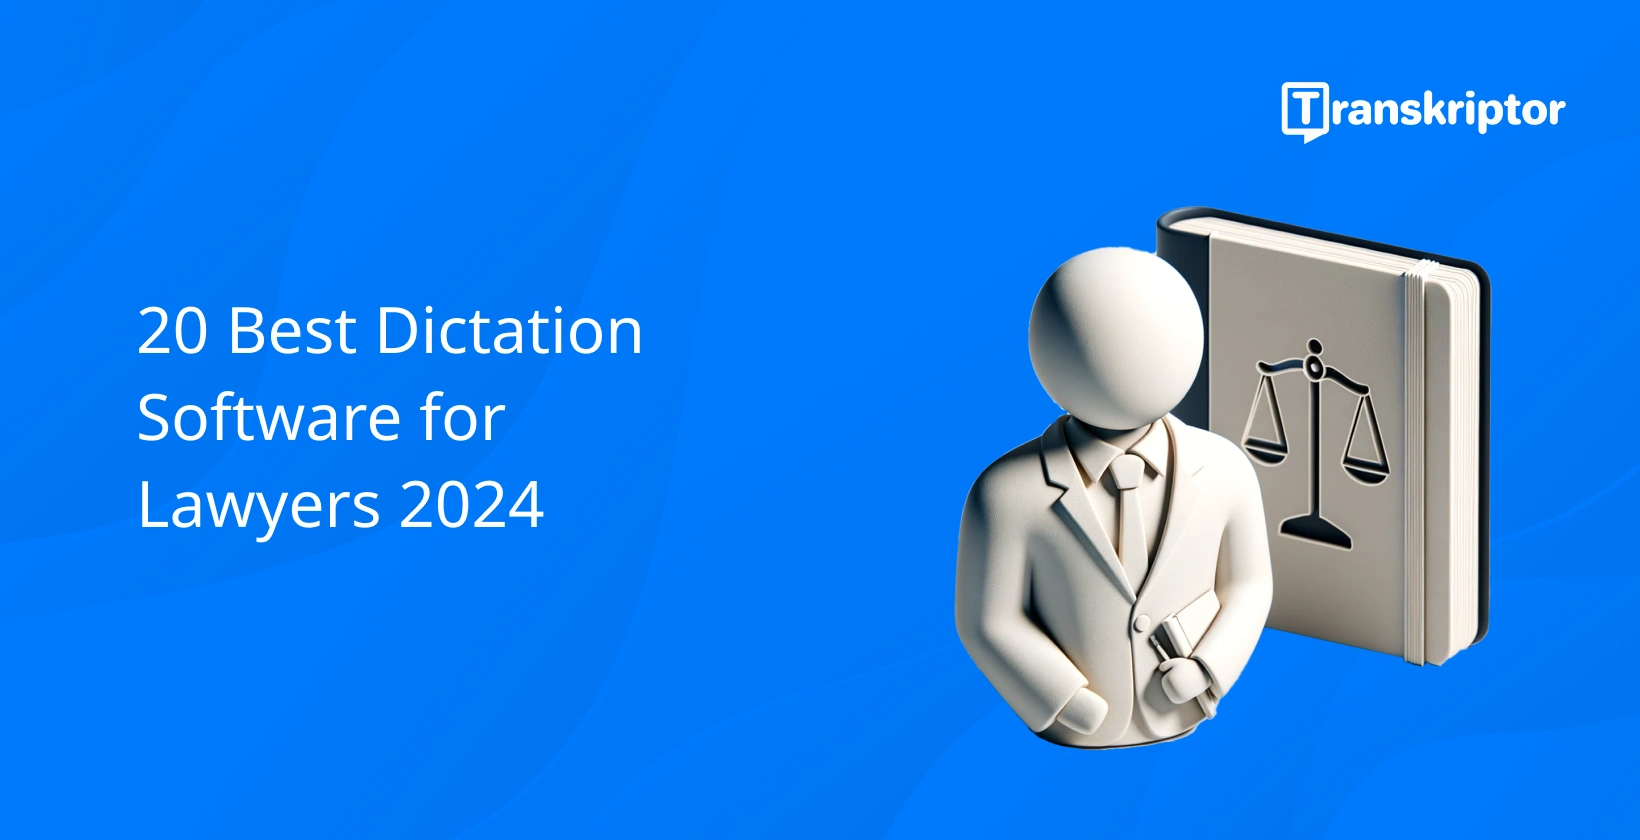 Dictation software for lawyers guide  in 2024, with figure holding a book symbolizing law.